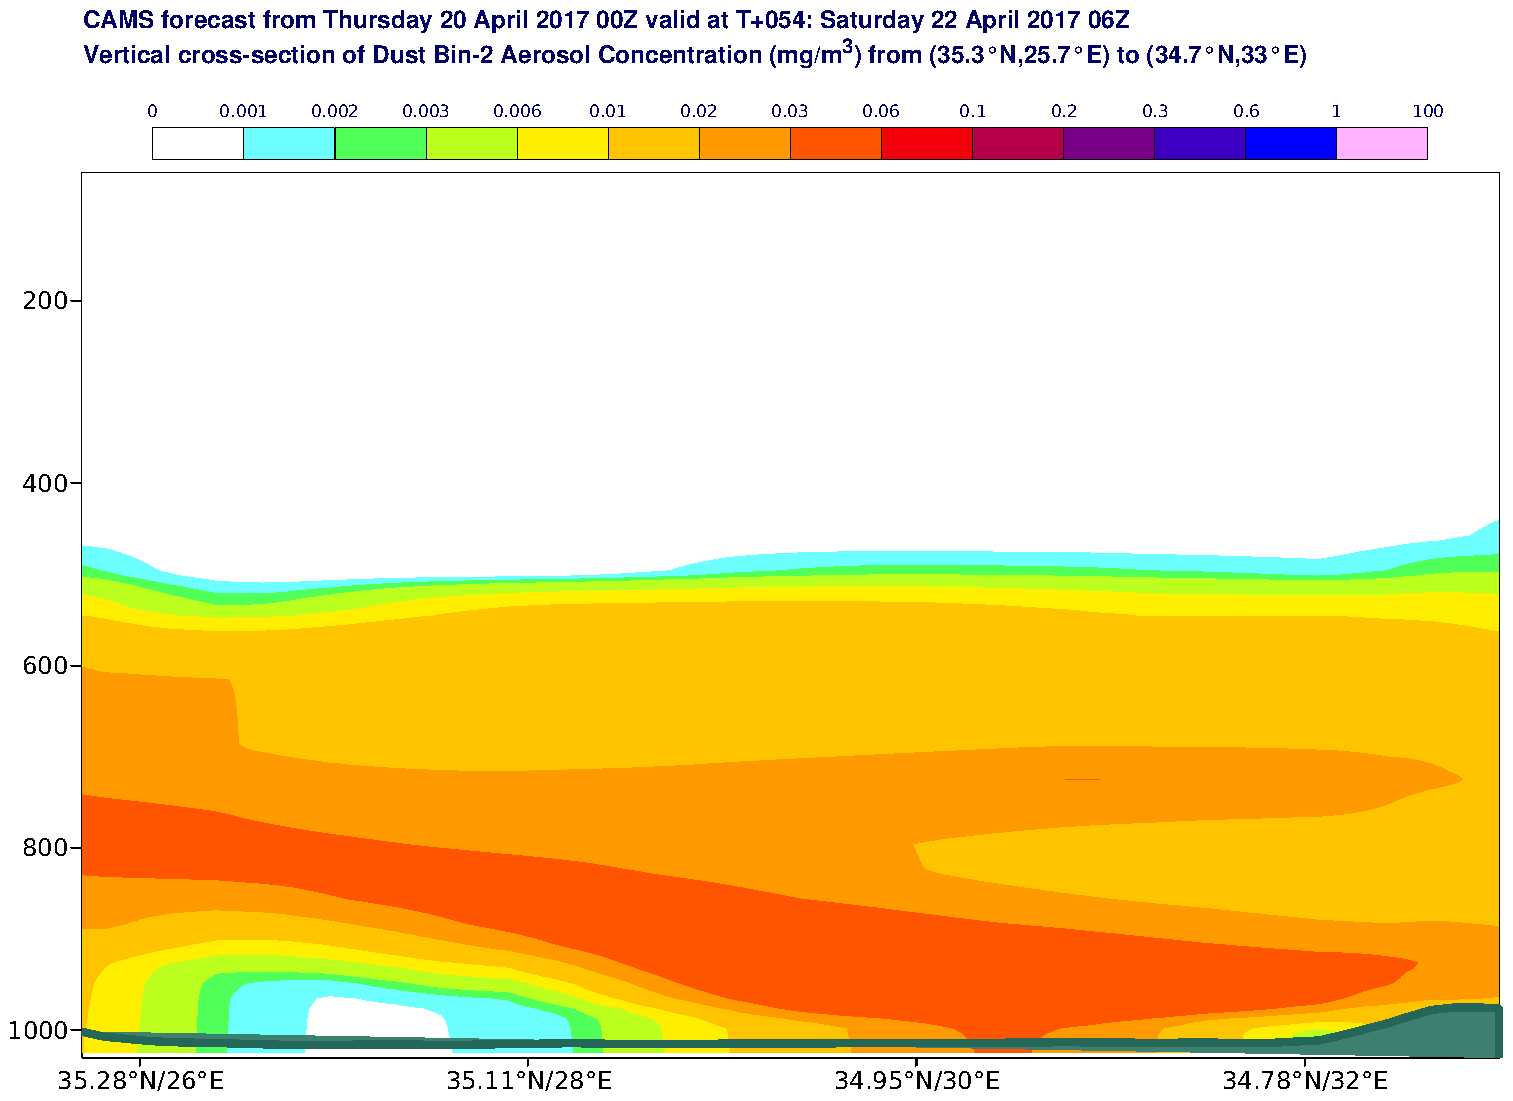 Vertical cross-section of Dust Bin-2 Aerosol Concentration (mg/m3) valid at T54 - 2017-04-22 06:00